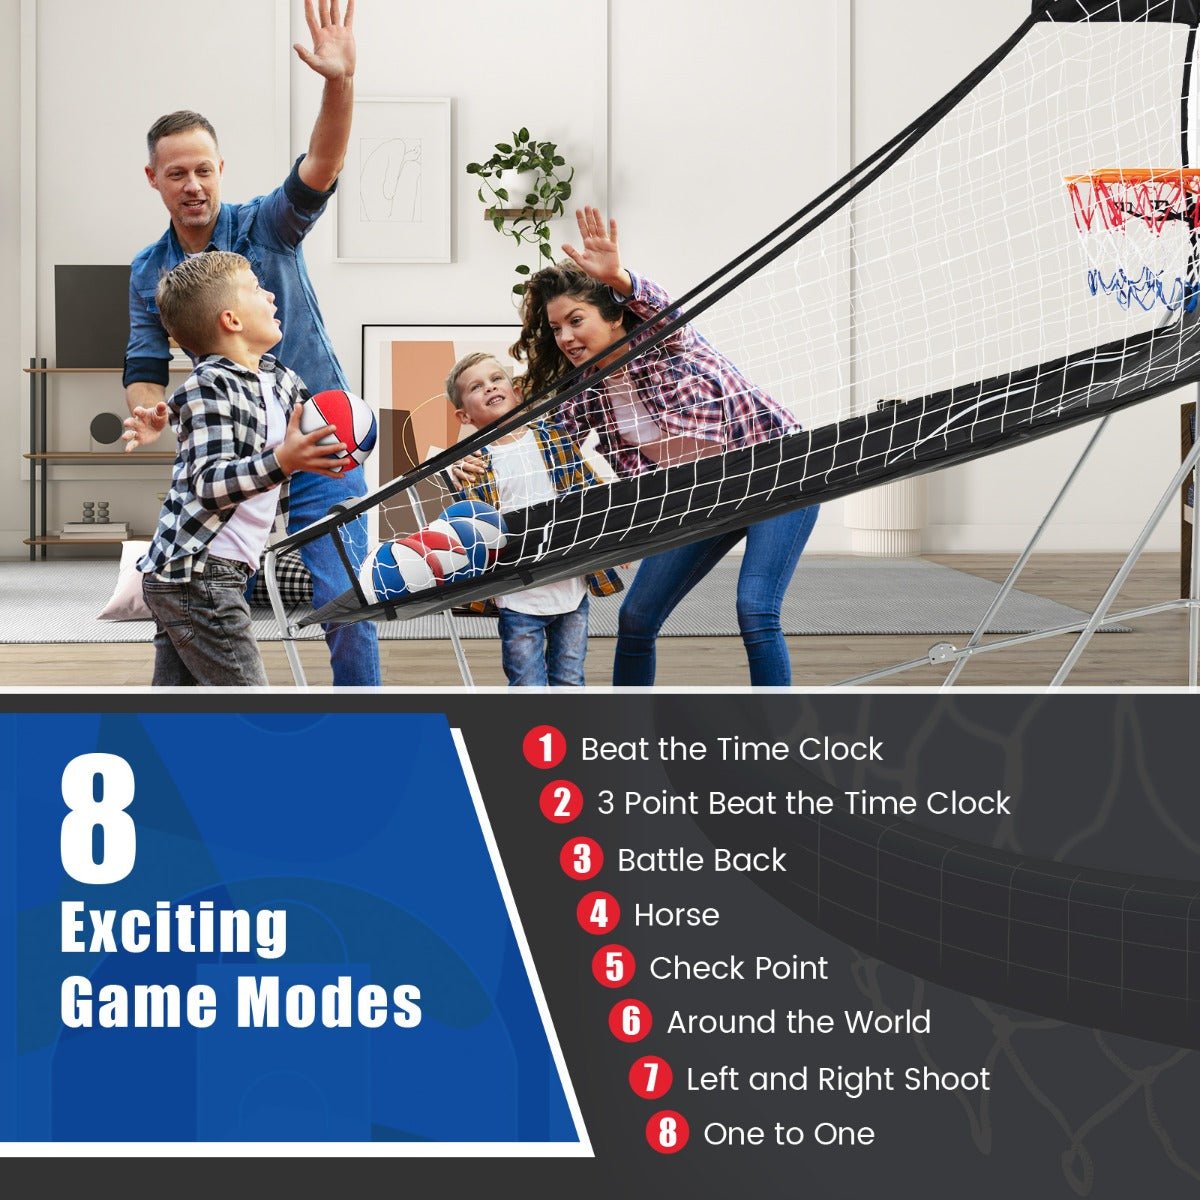 Family Basketball Arcade with 8 Modes - Blue